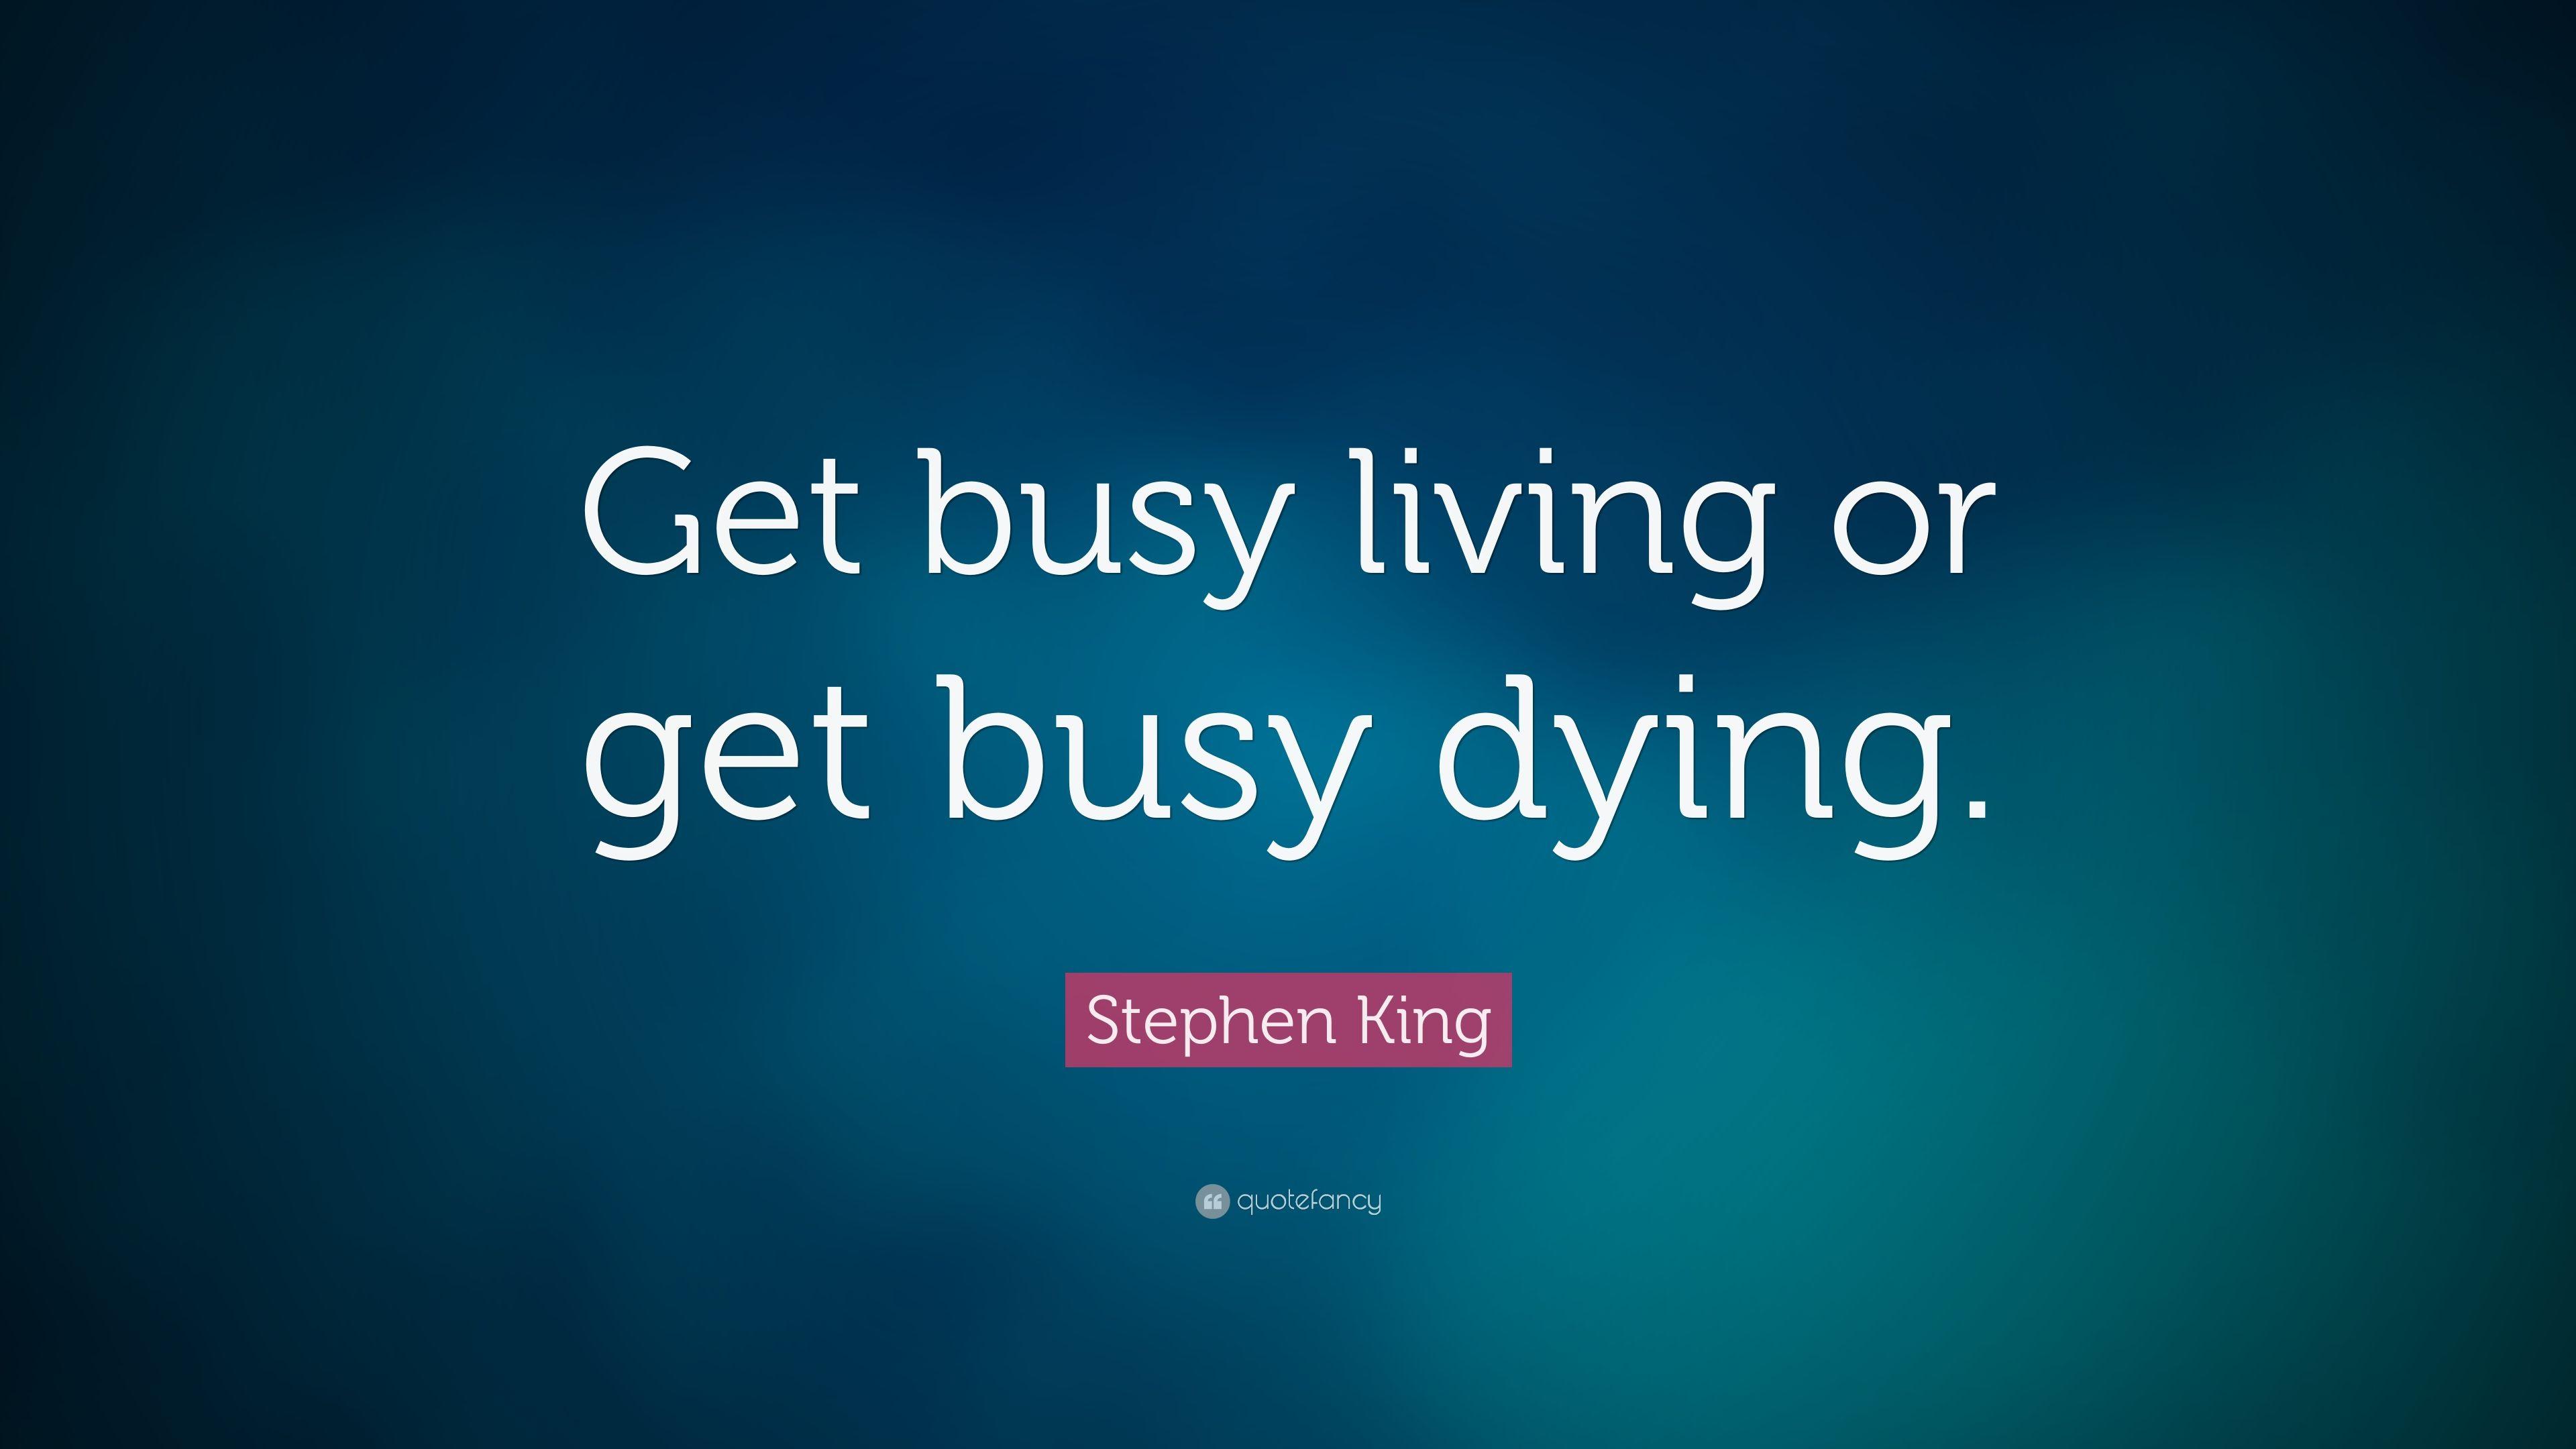 Stephen King Quote: “Get busy living or get busy dying.” 17